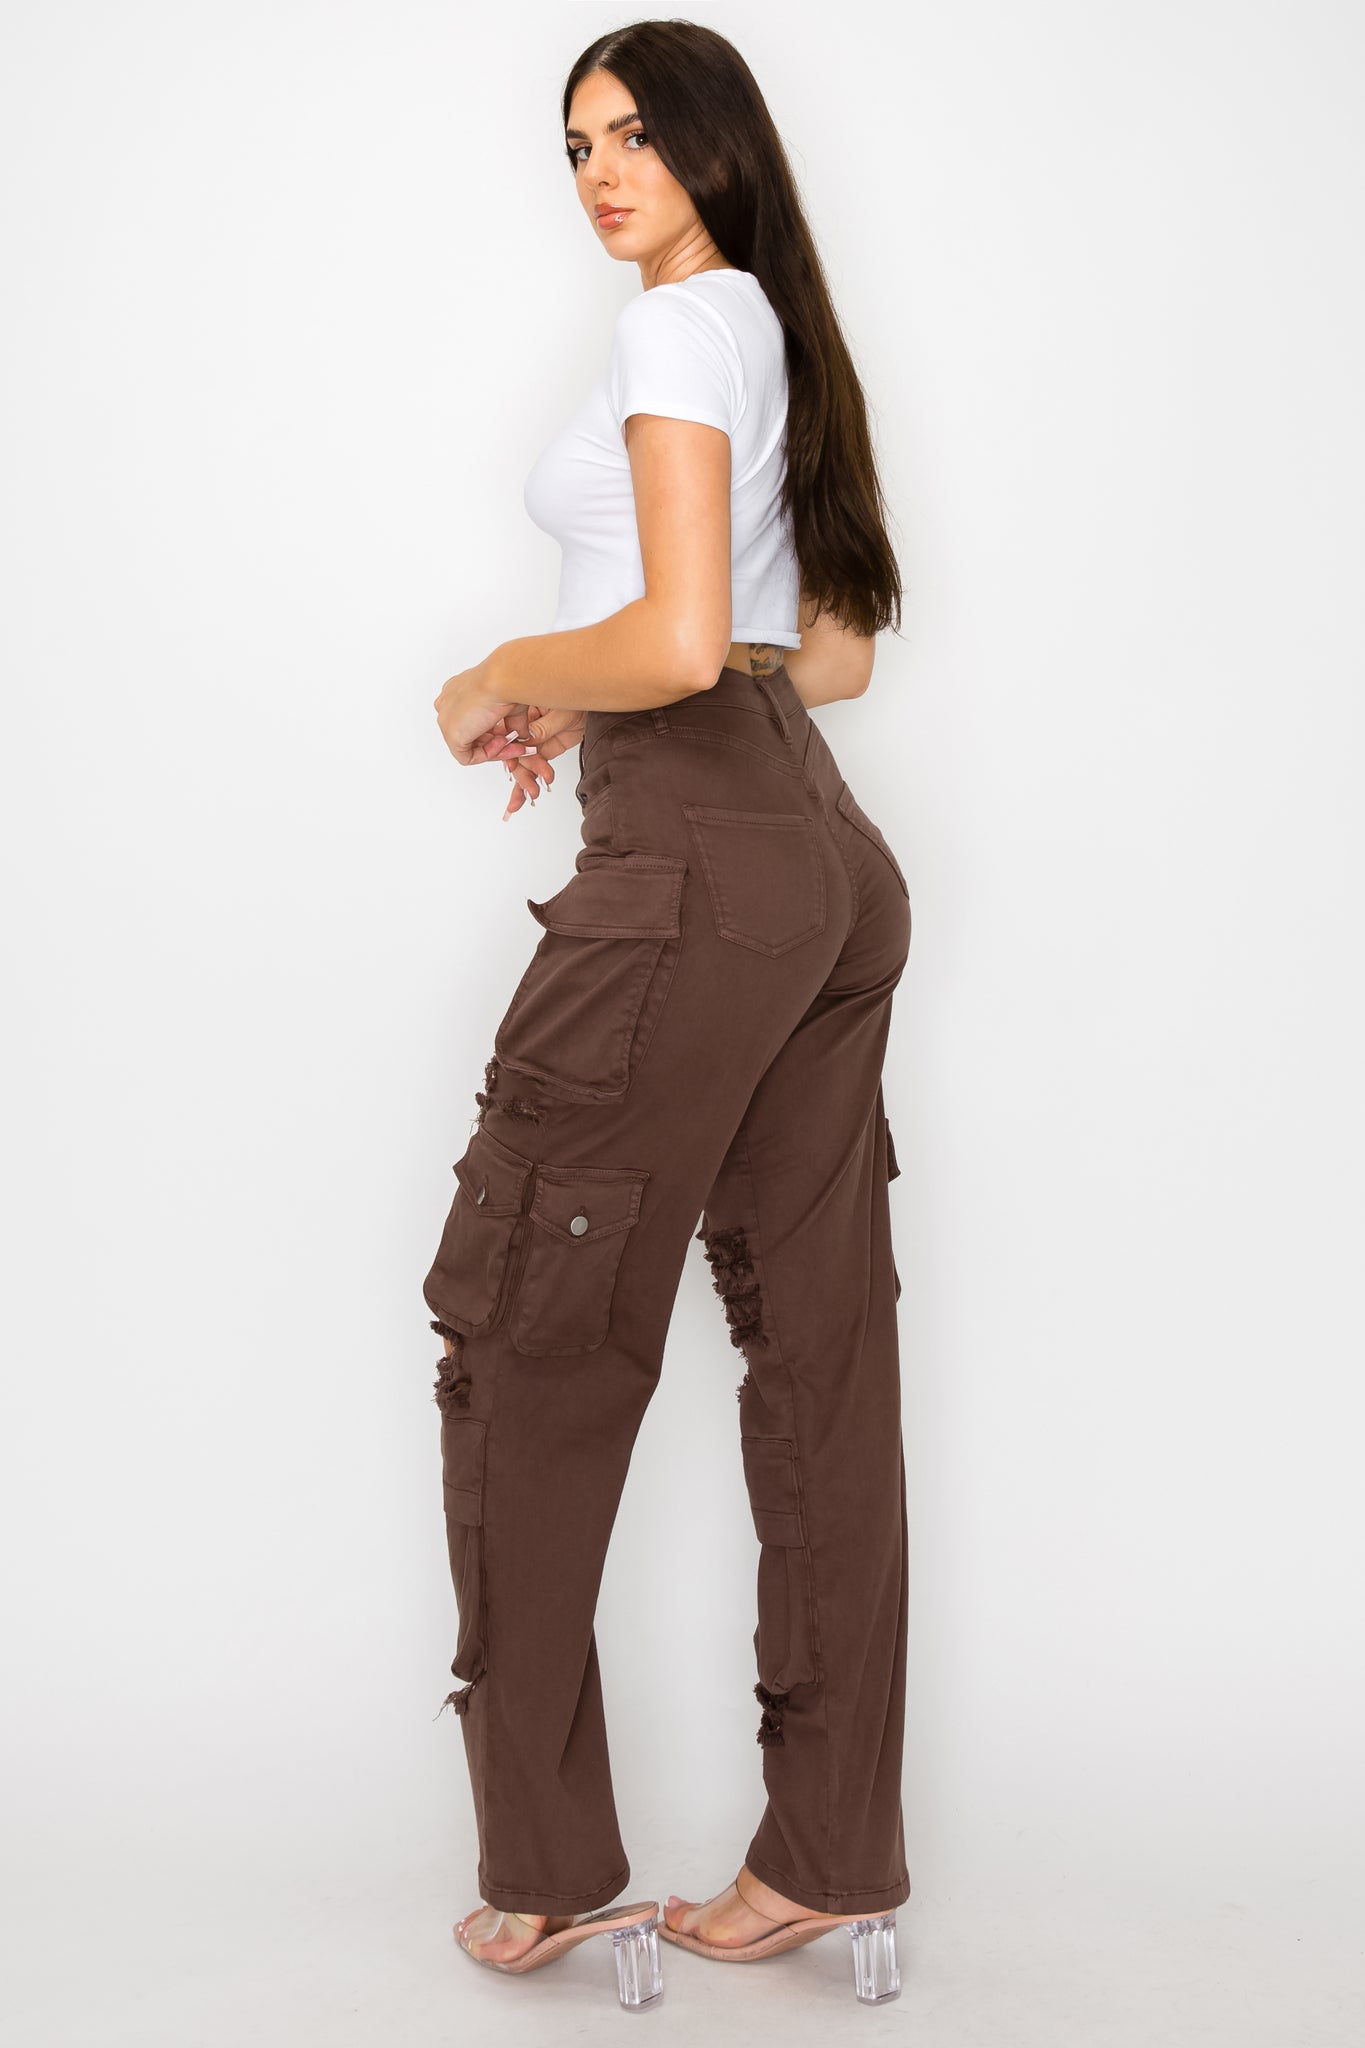 40584 Women's High Rise Cargo Pants w/ Extra Front Cargo Pockets